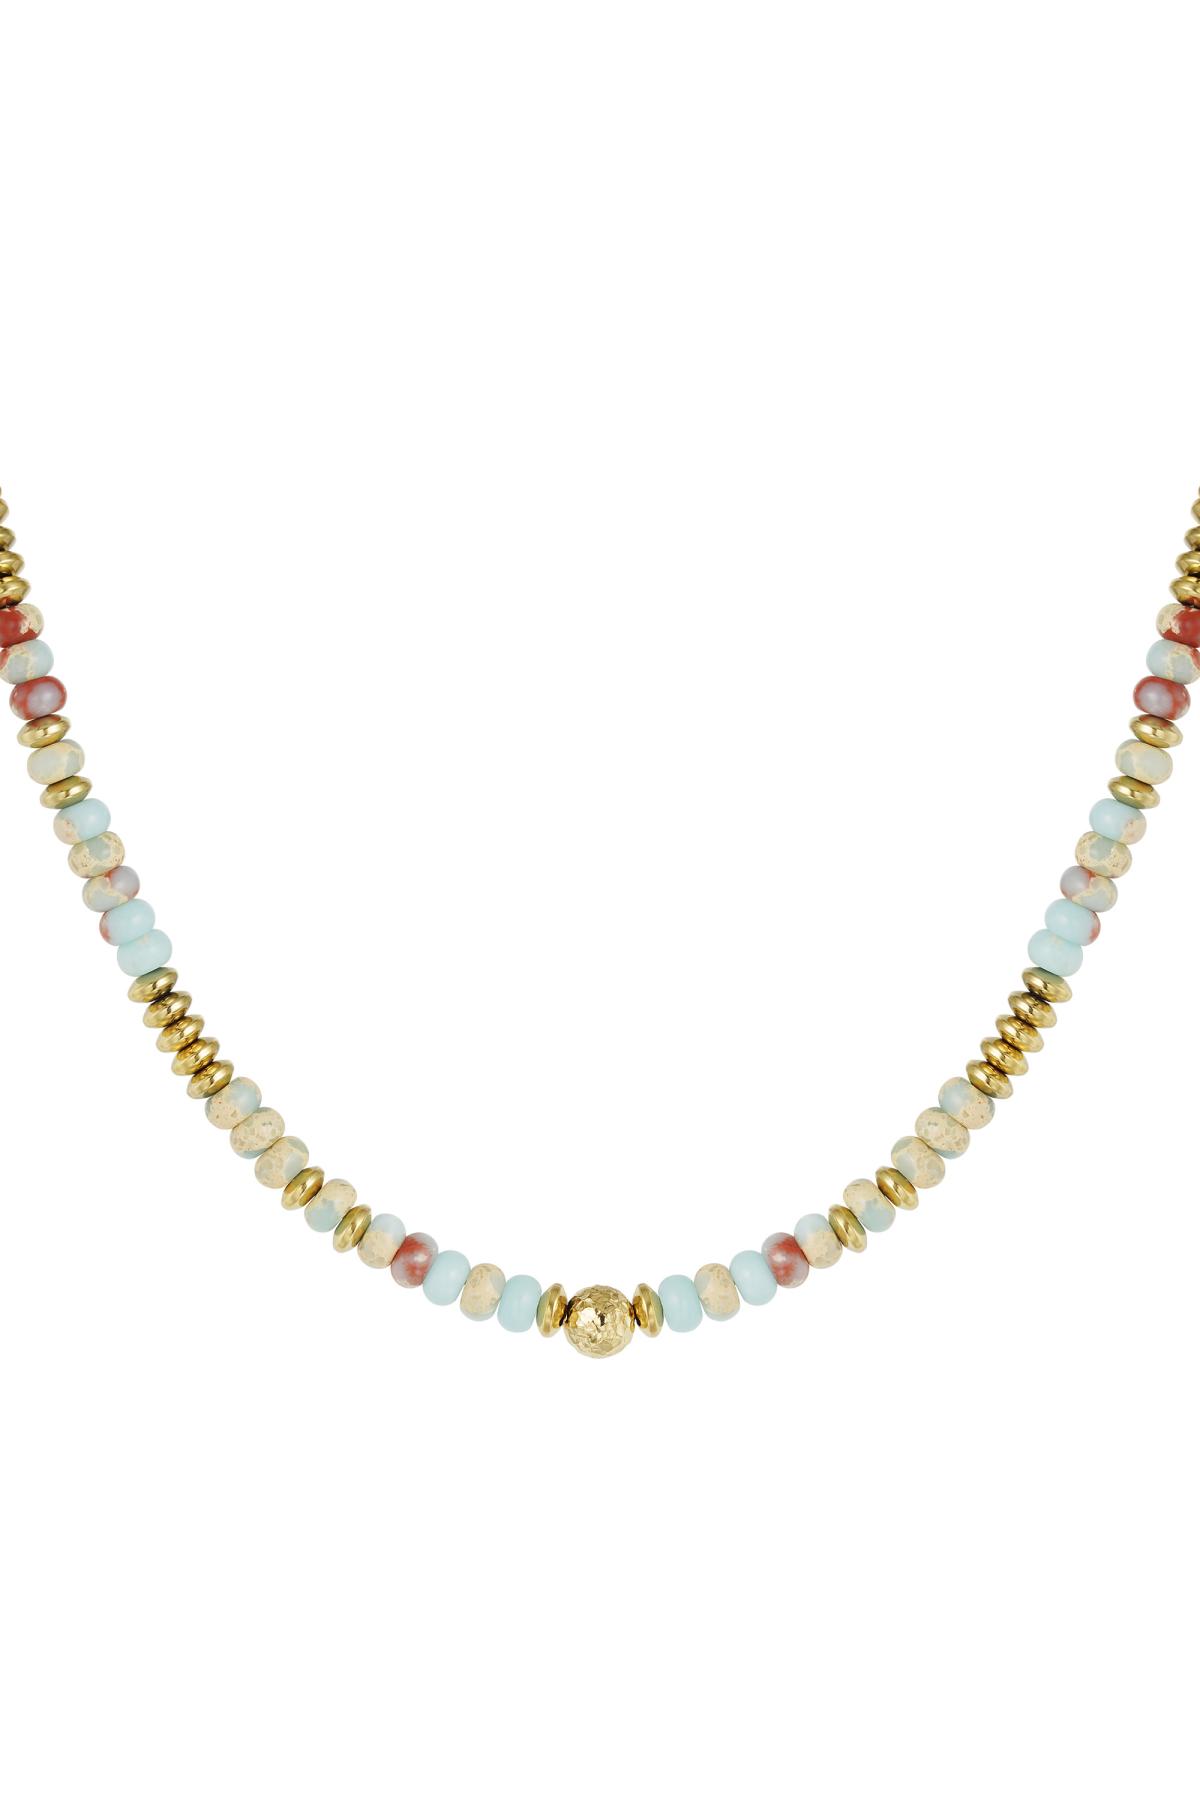 Necklace with multi-coloured stone beads - Natural stone collection Light Blue Hematite h5 